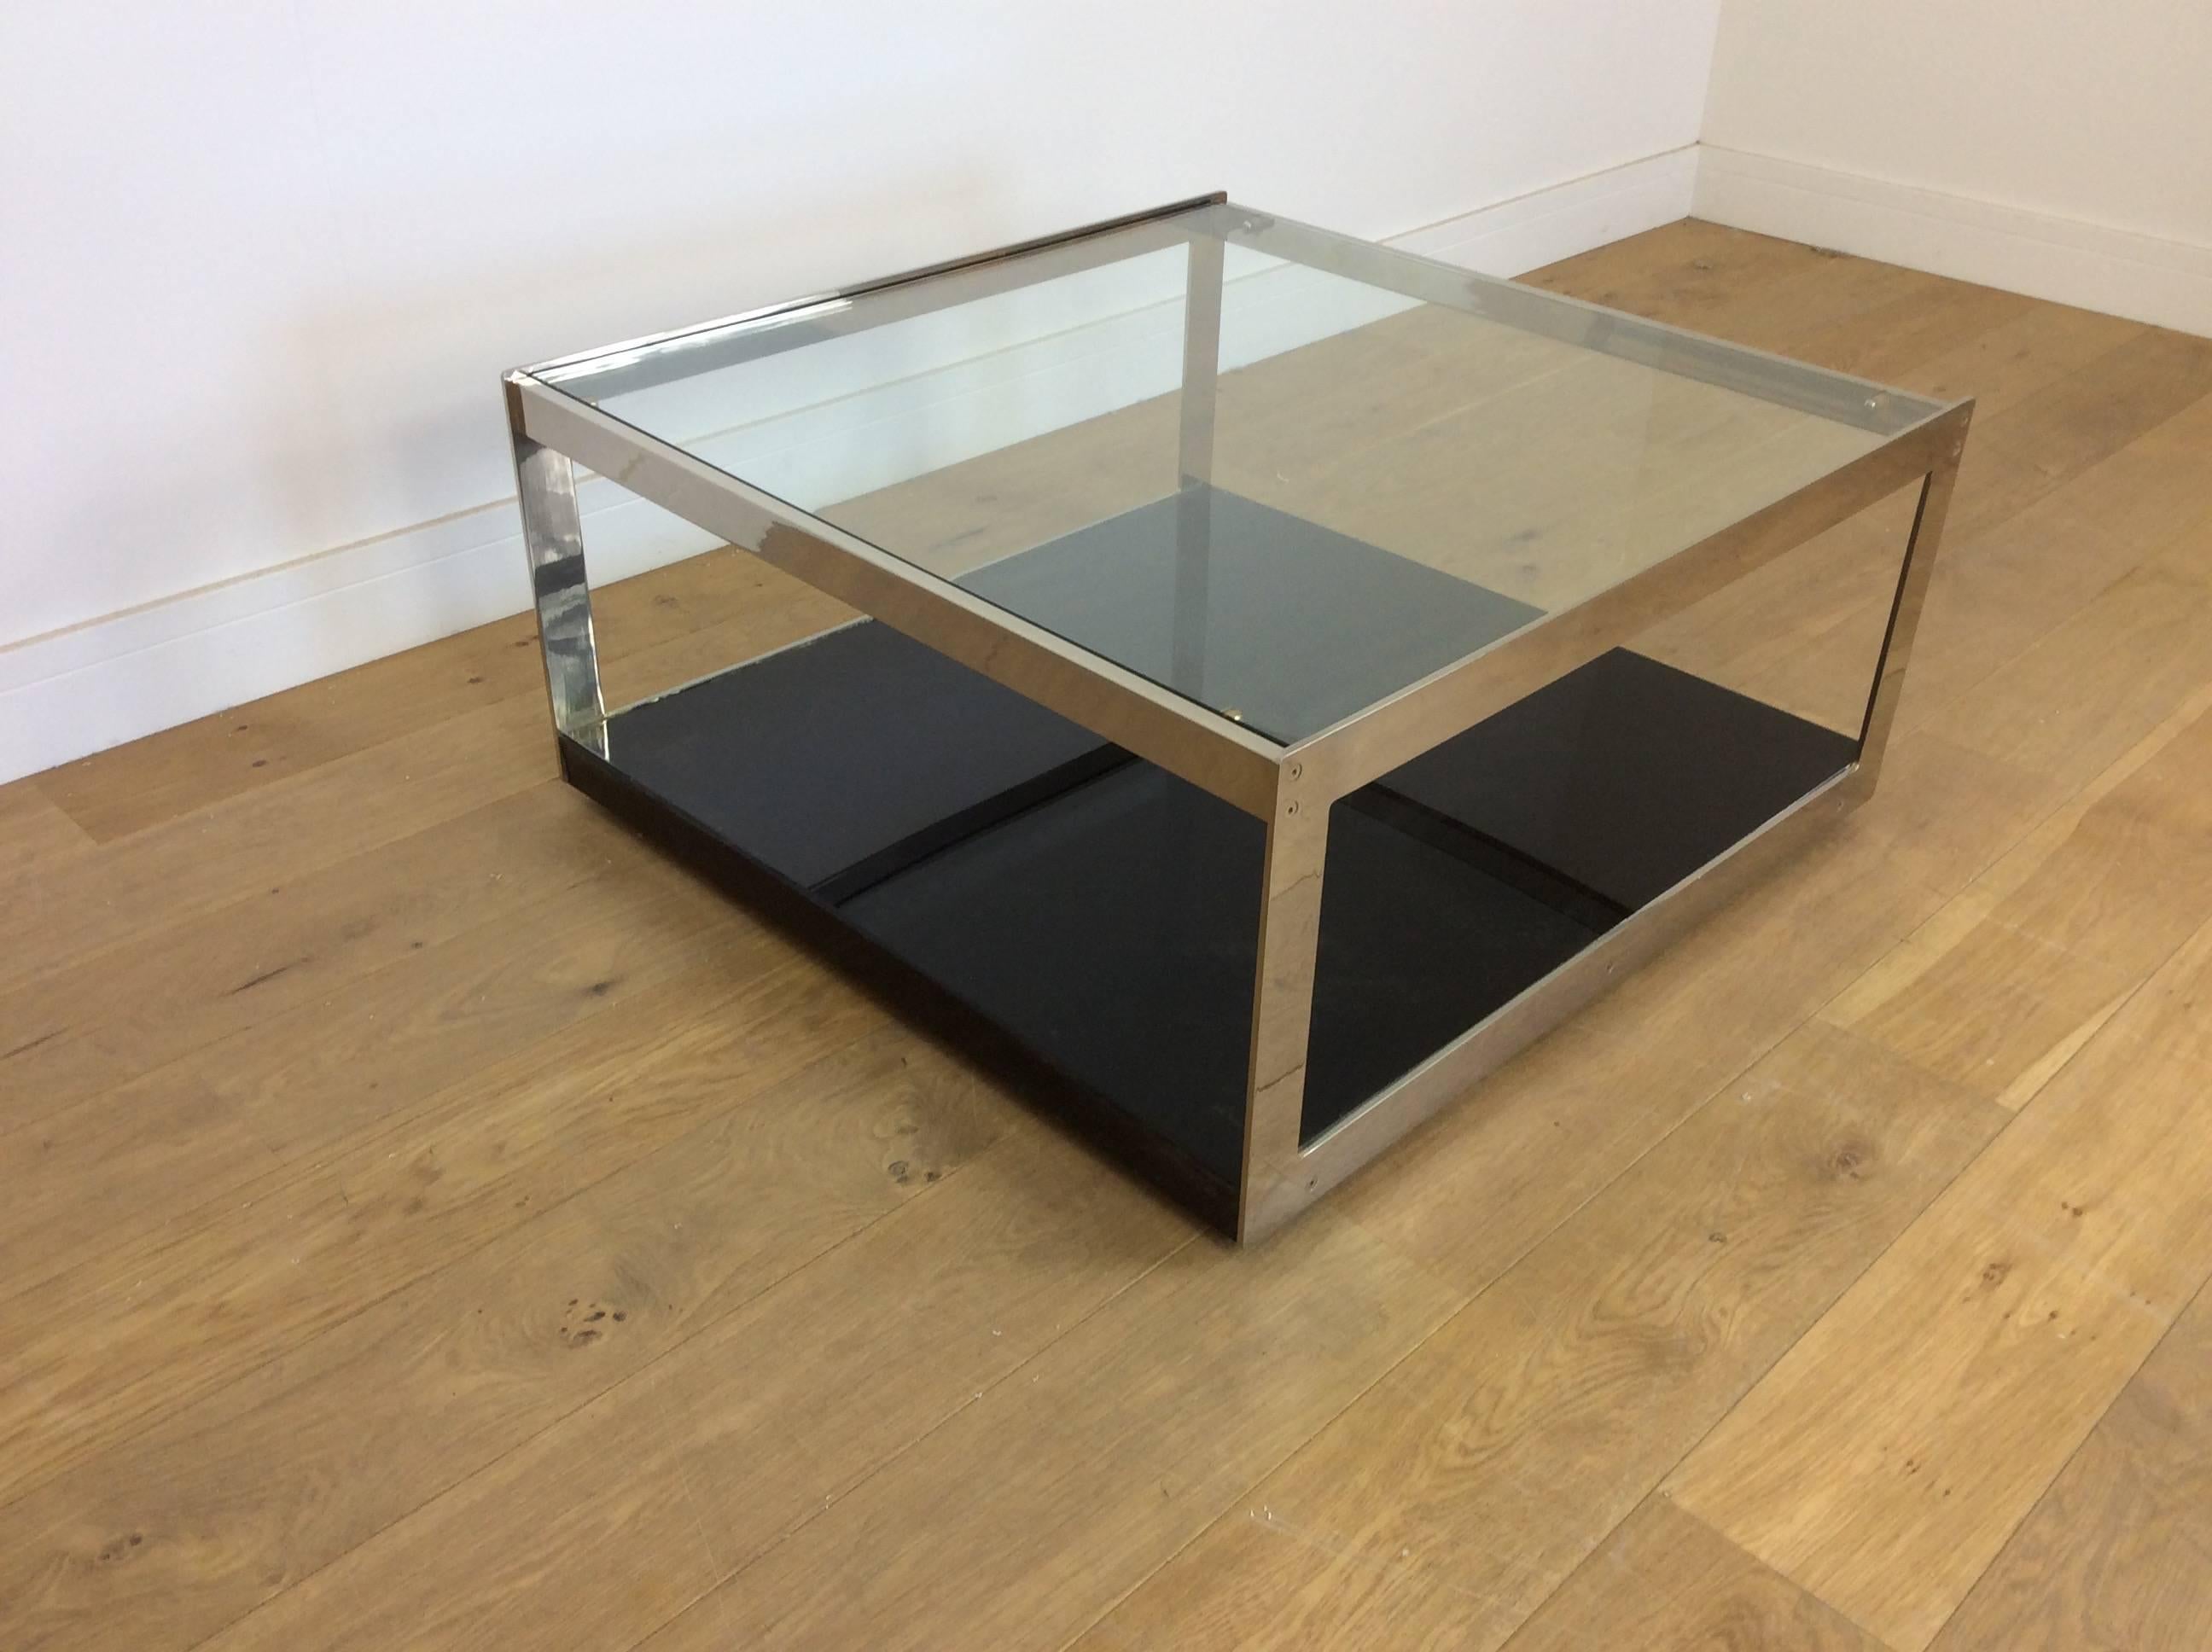 Merrow Associates.
Midcentury large cocktail table by Merrow Associates, high quality flat chrome base with plate glass top and rare black laminate base.
Designed by Richard Young.
Measures: 40 cm H 86 cm W 83 cm D.
British, circa 1970.